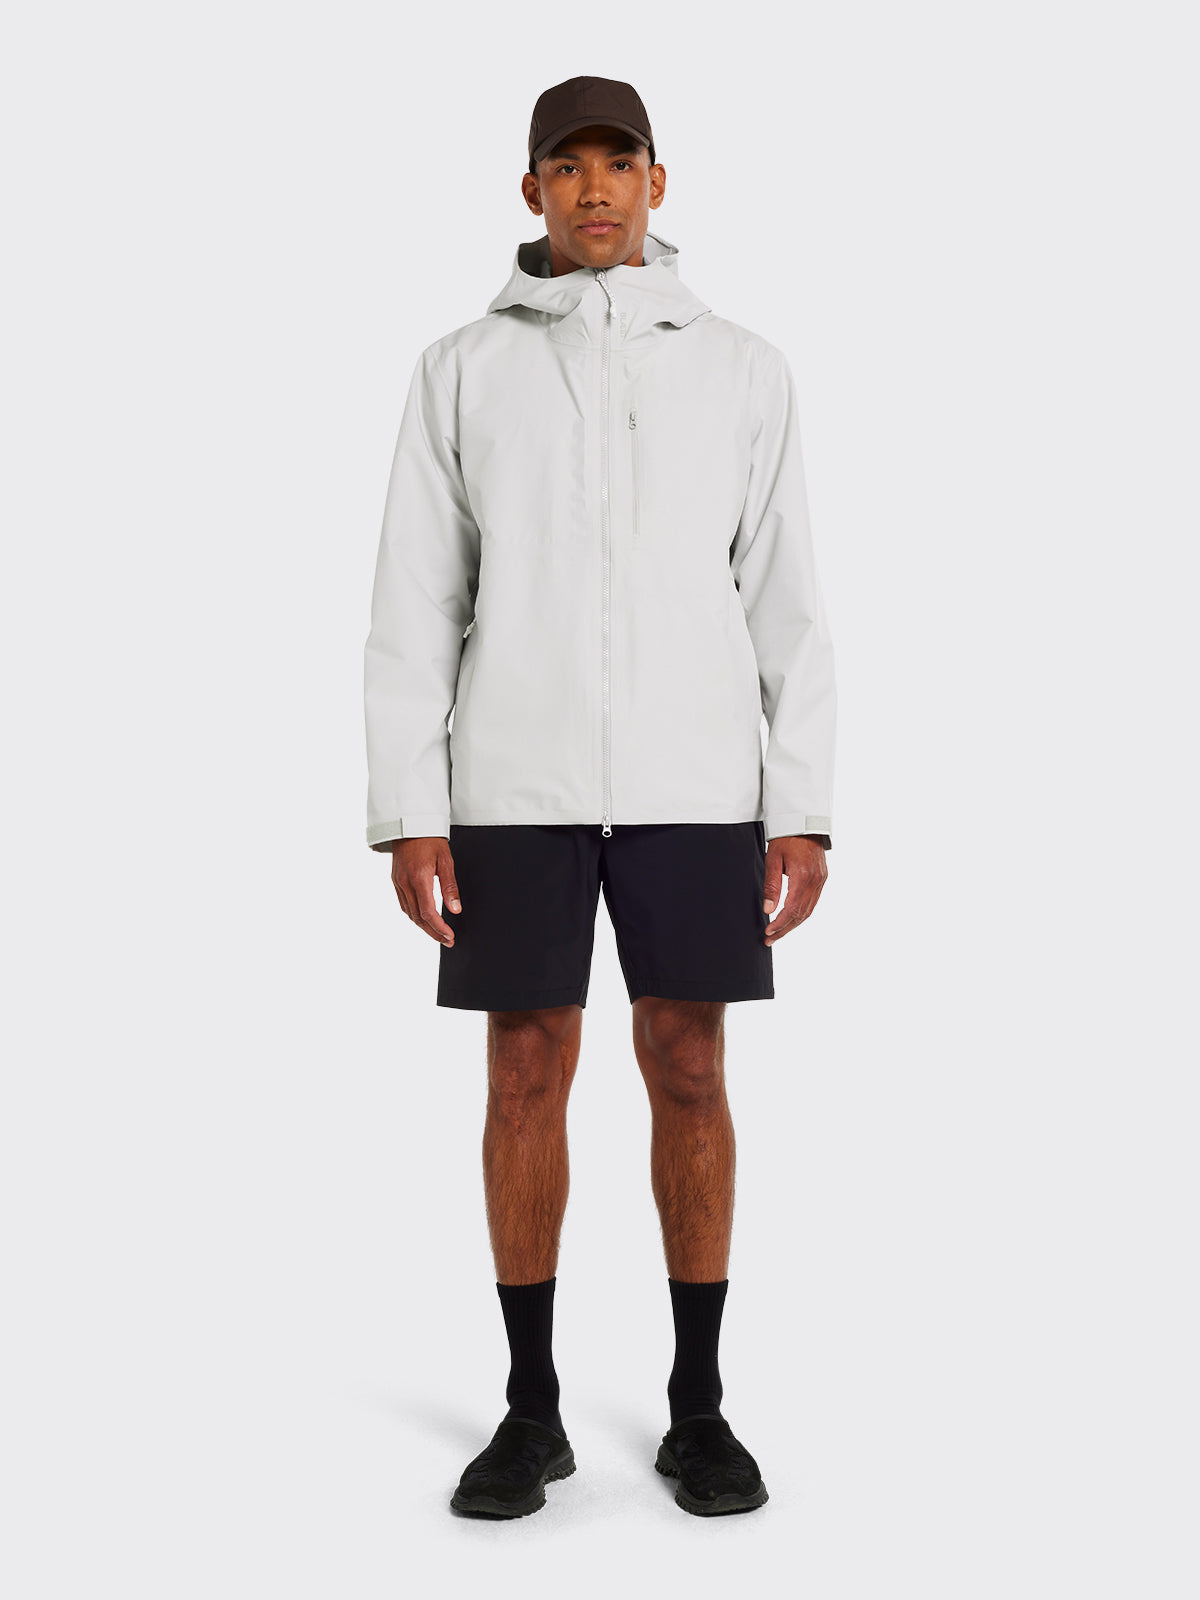 Man dressed in Stette jacket from Blæst in the color Oyster Mushroom